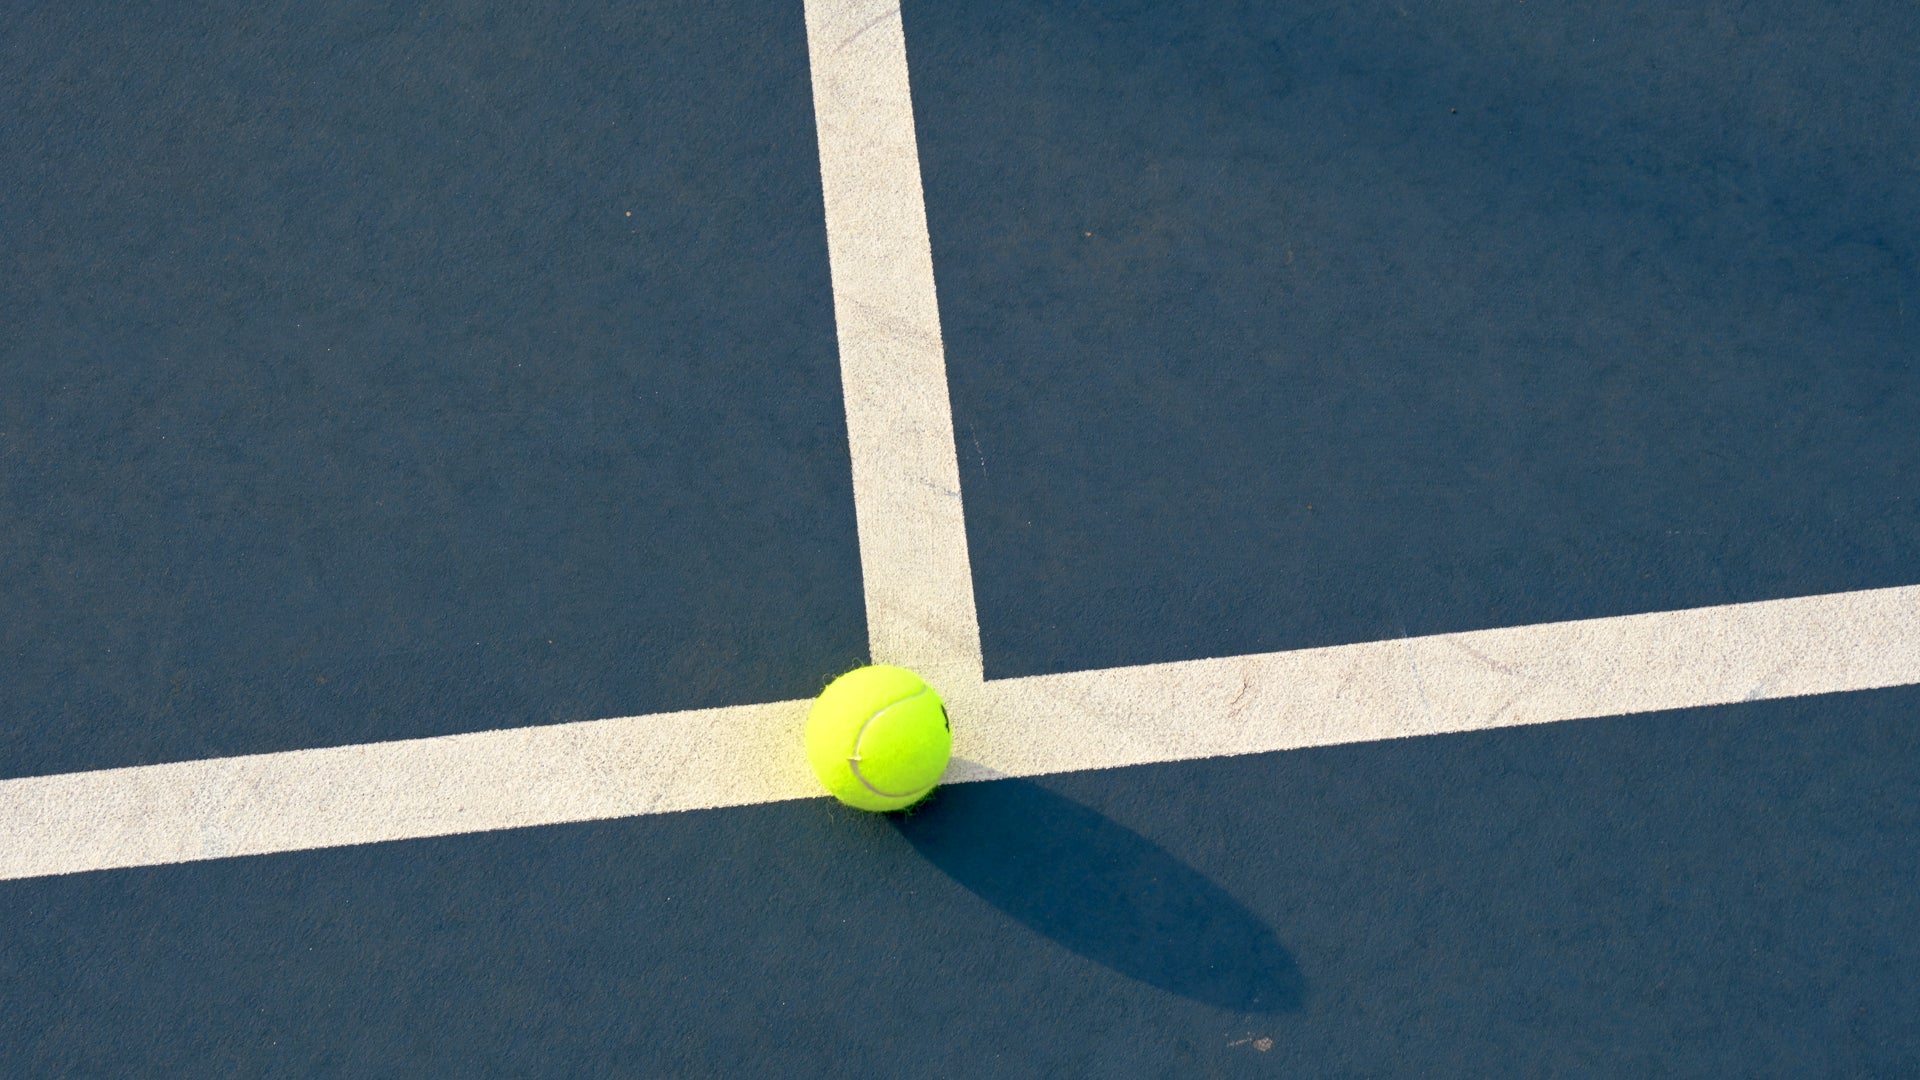 How Do You Keep Score in Tennis? - Forest Crest Athletic Club